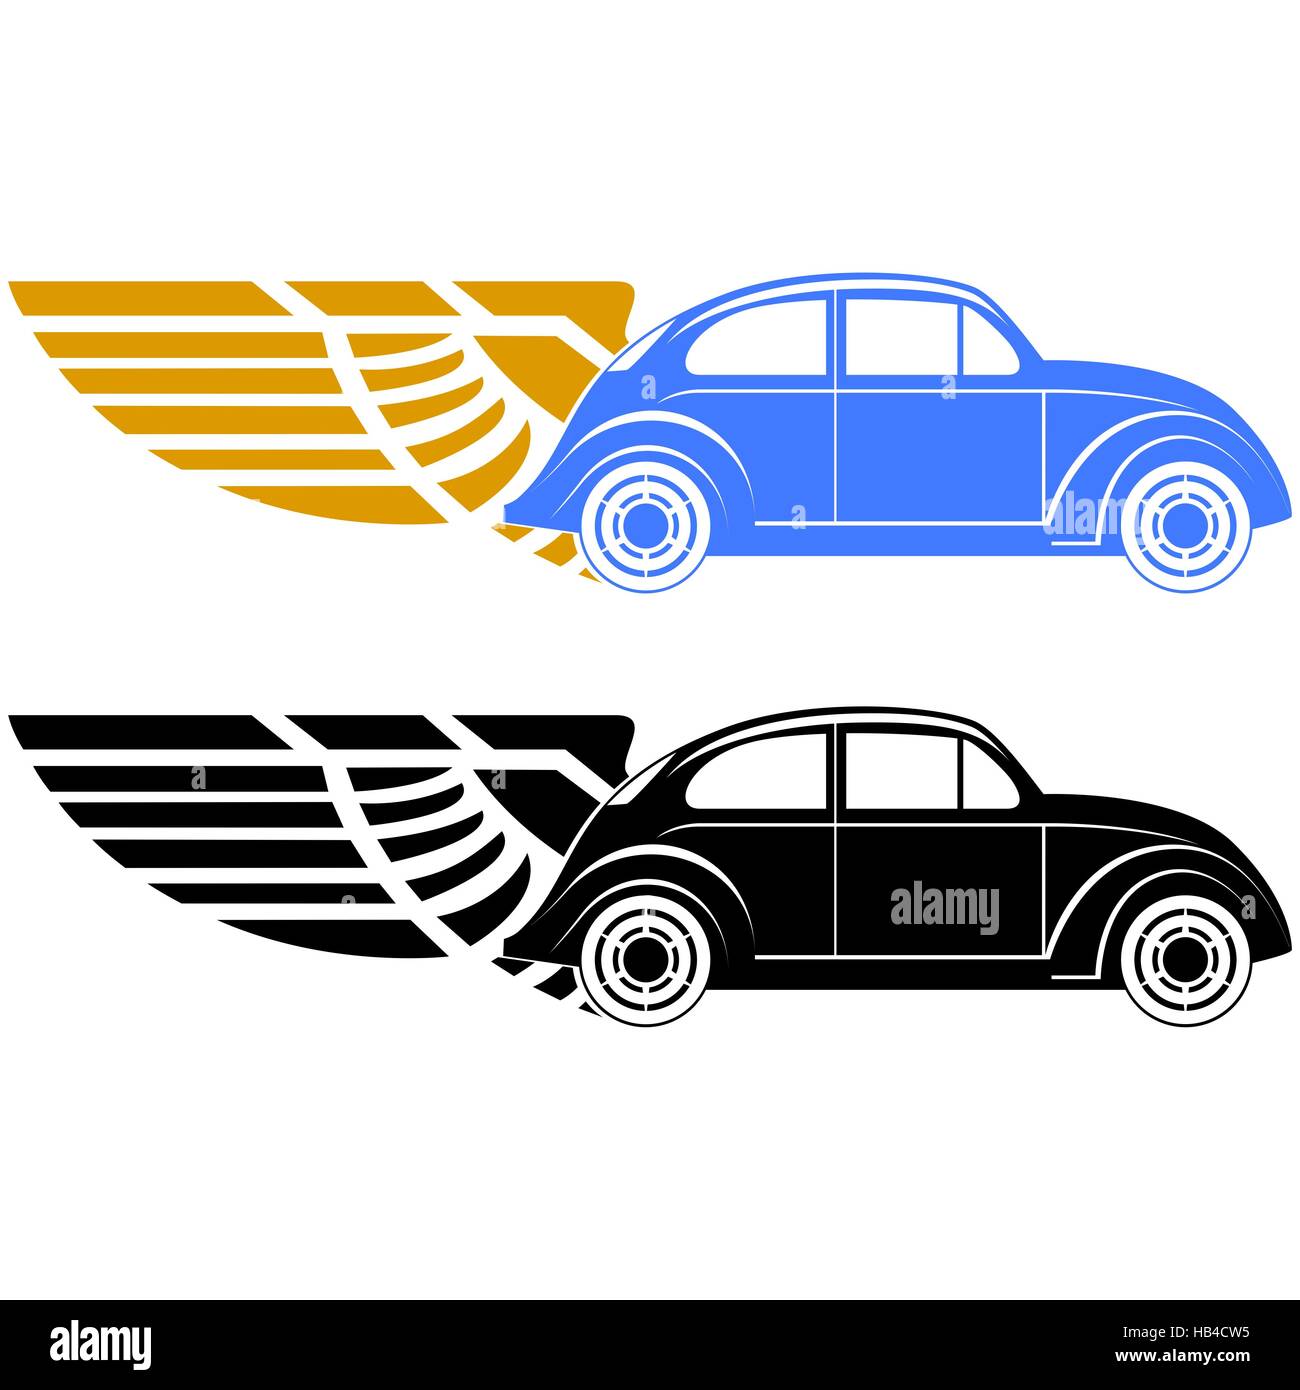 Abstract car on abstract wings. The illustration on a white background. Stock Photo